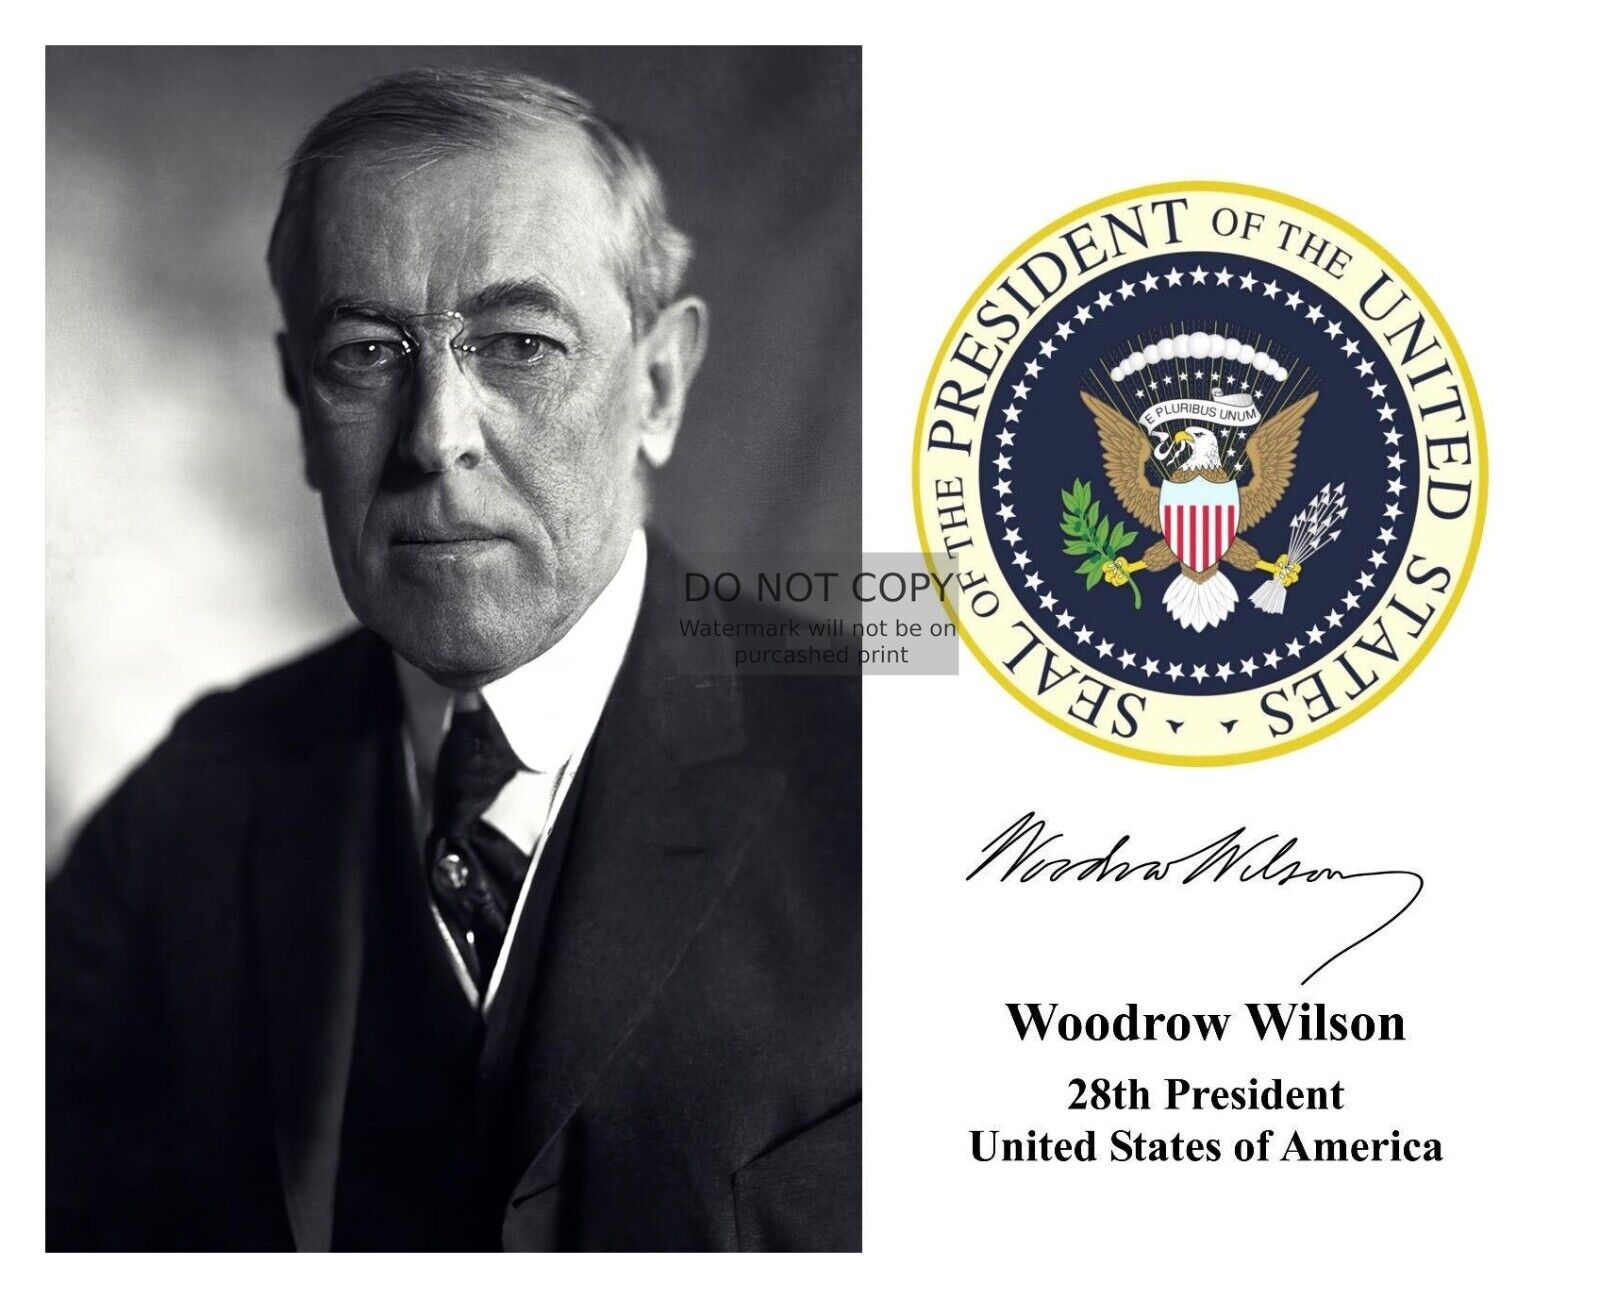 PRESIDENT WOODROW WILSON PRESIDENTIAL SEAL AUTOGRAPHED 8X10 PHOTOGRAPH